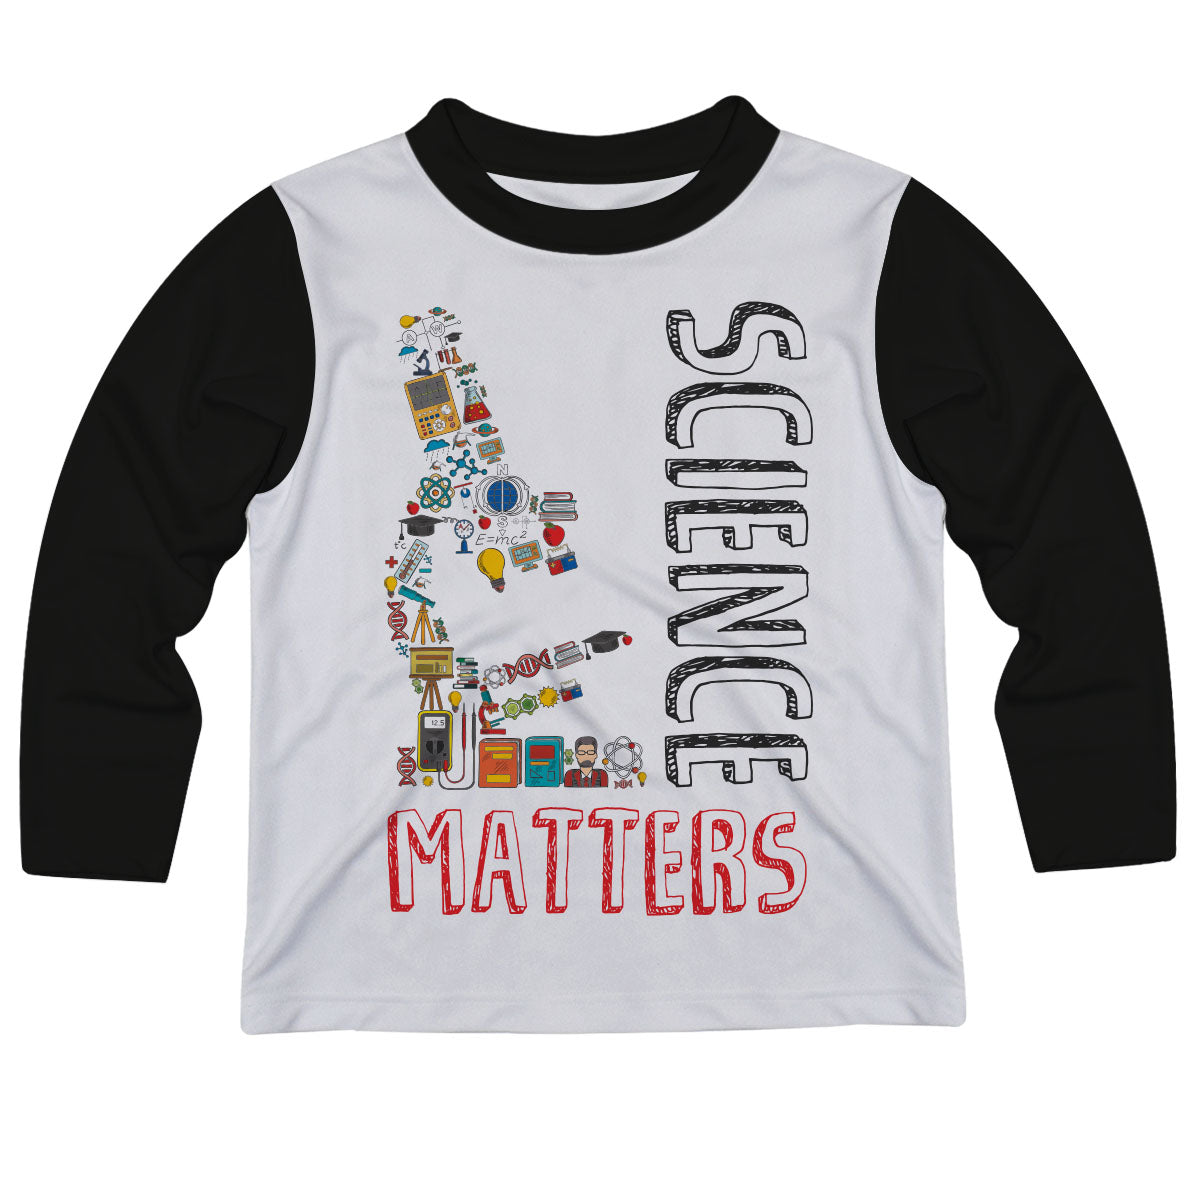 Science Matters White and Black Long Sleeve Tee Shirt